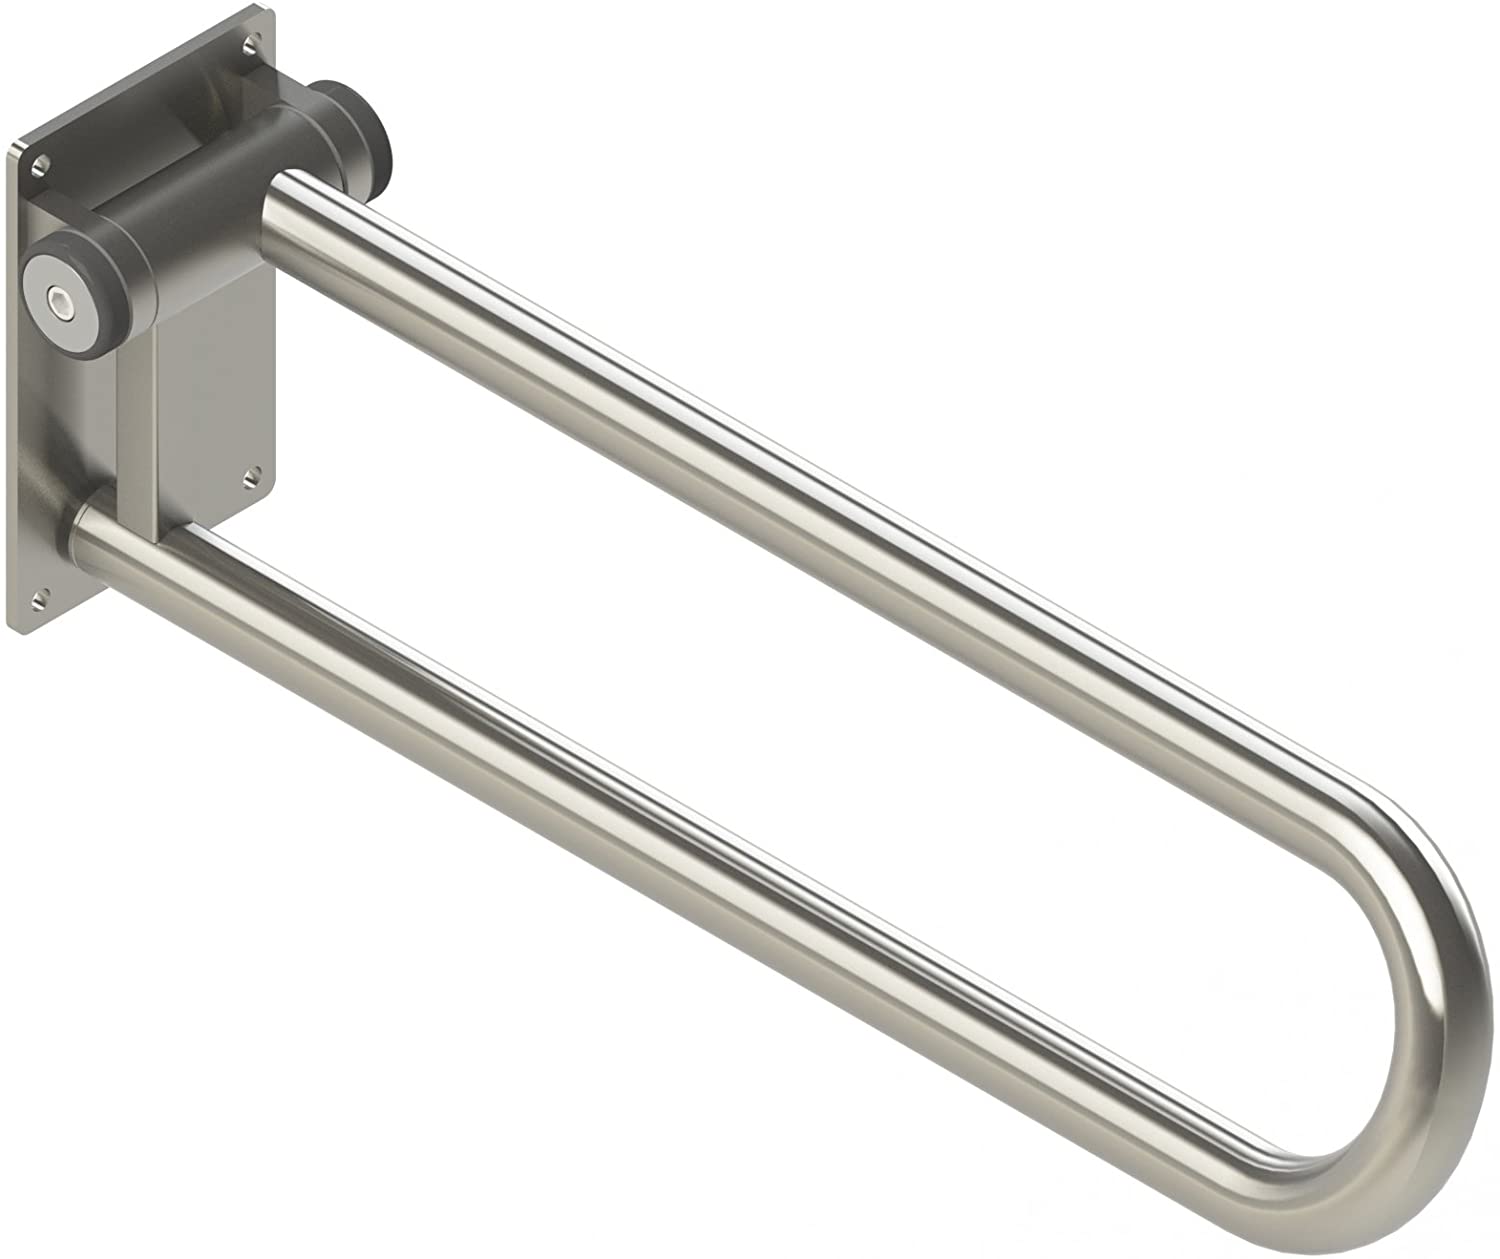 HealthCraft,PT-WR32R-SS,Stainless Steel,Stainless Steel,32"